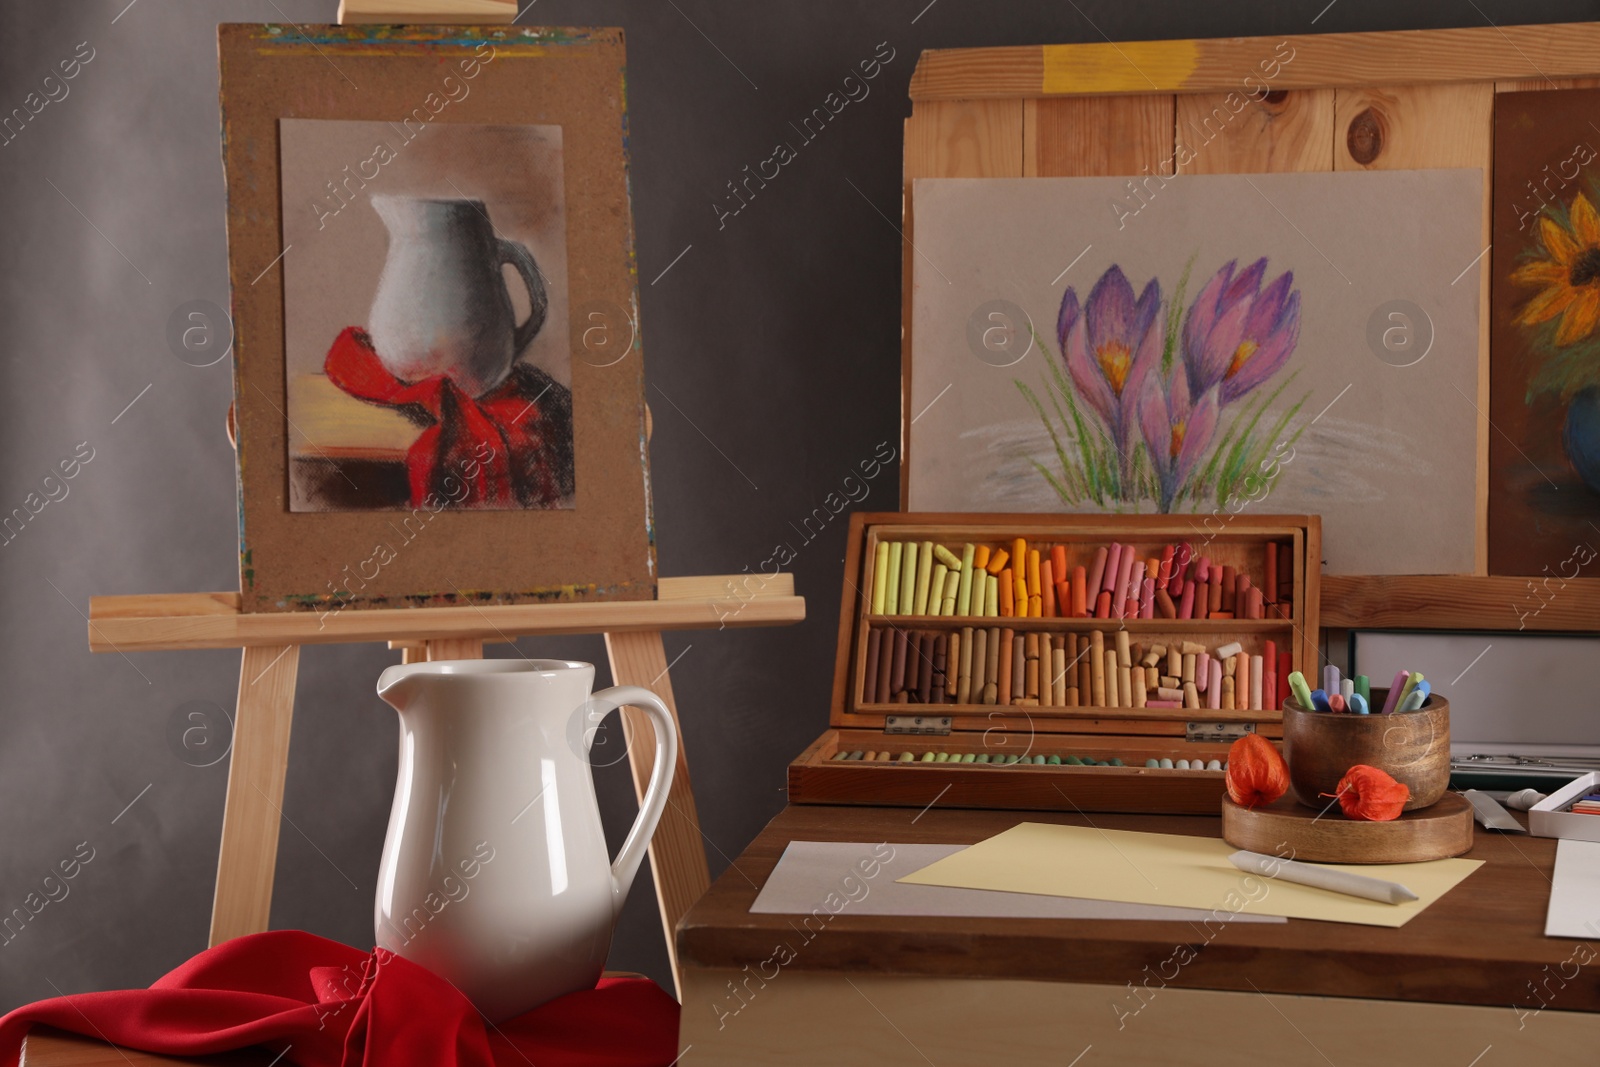 Photo of Artist's workplace with drawings, soft pastels and color pencils on table